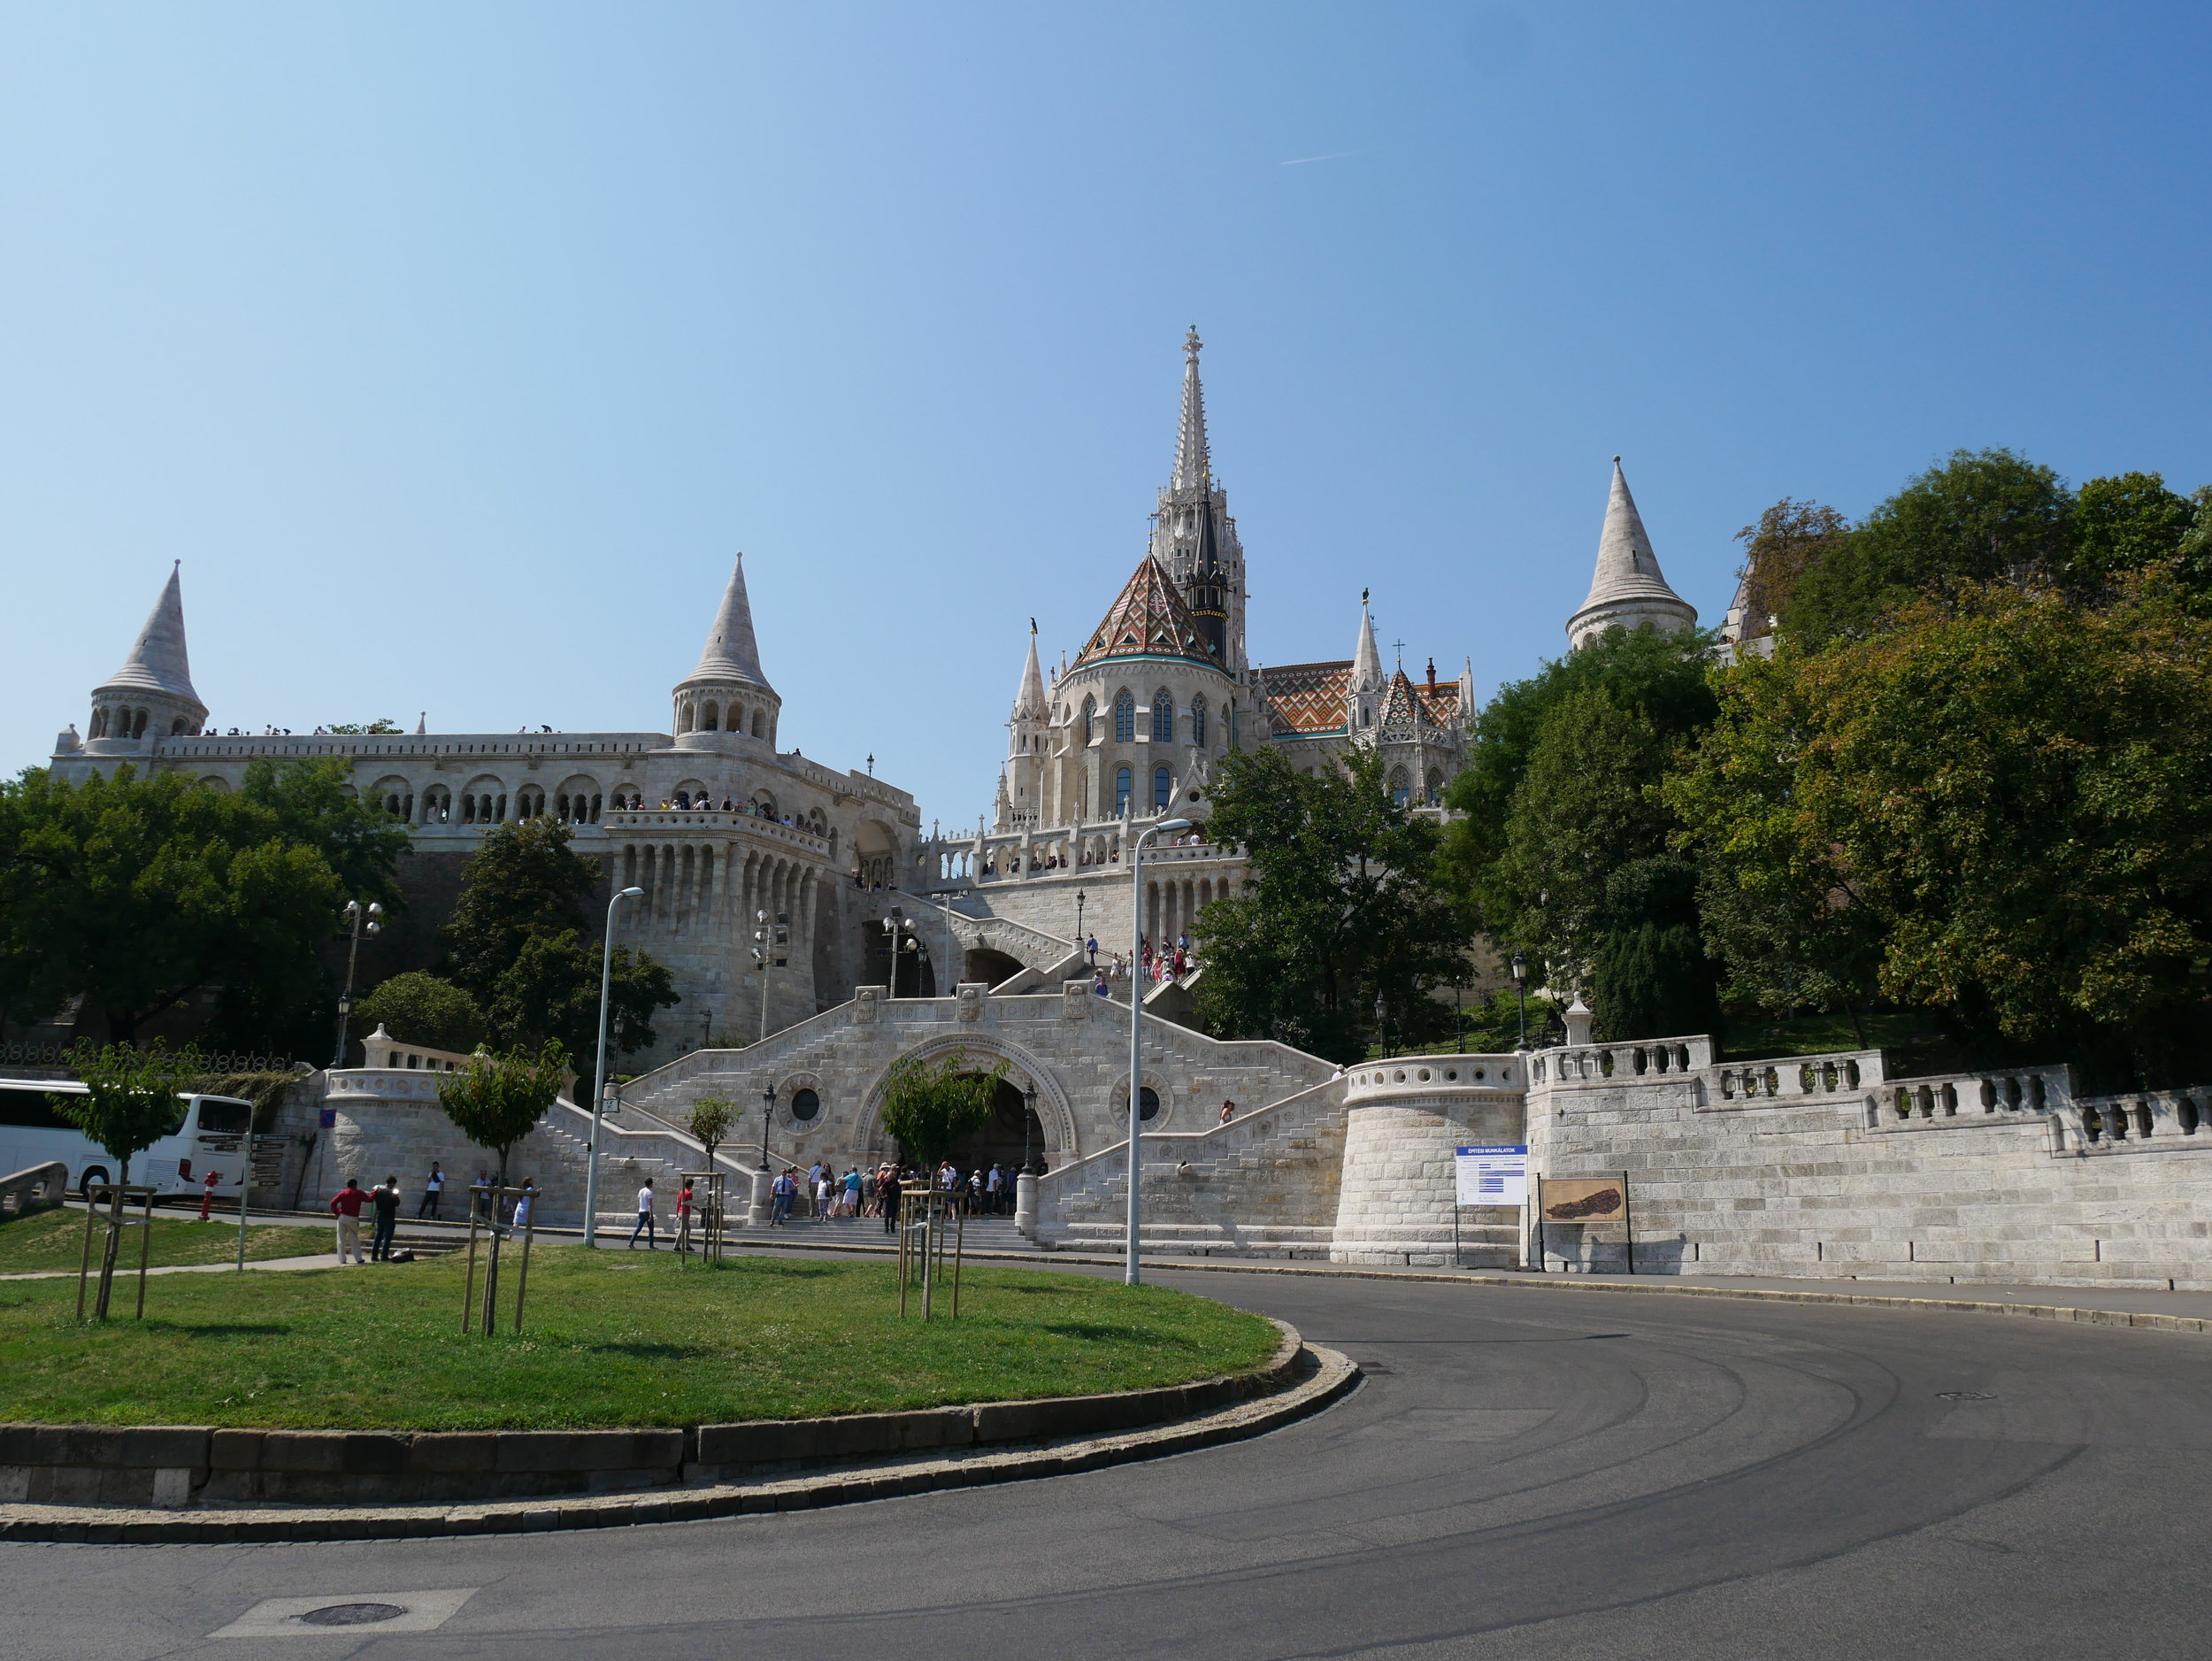  After climbing many stairs, we arrived at Fisherman's Bastion, a historic Buda terrace that overlooks the Danube.&nbsp; 